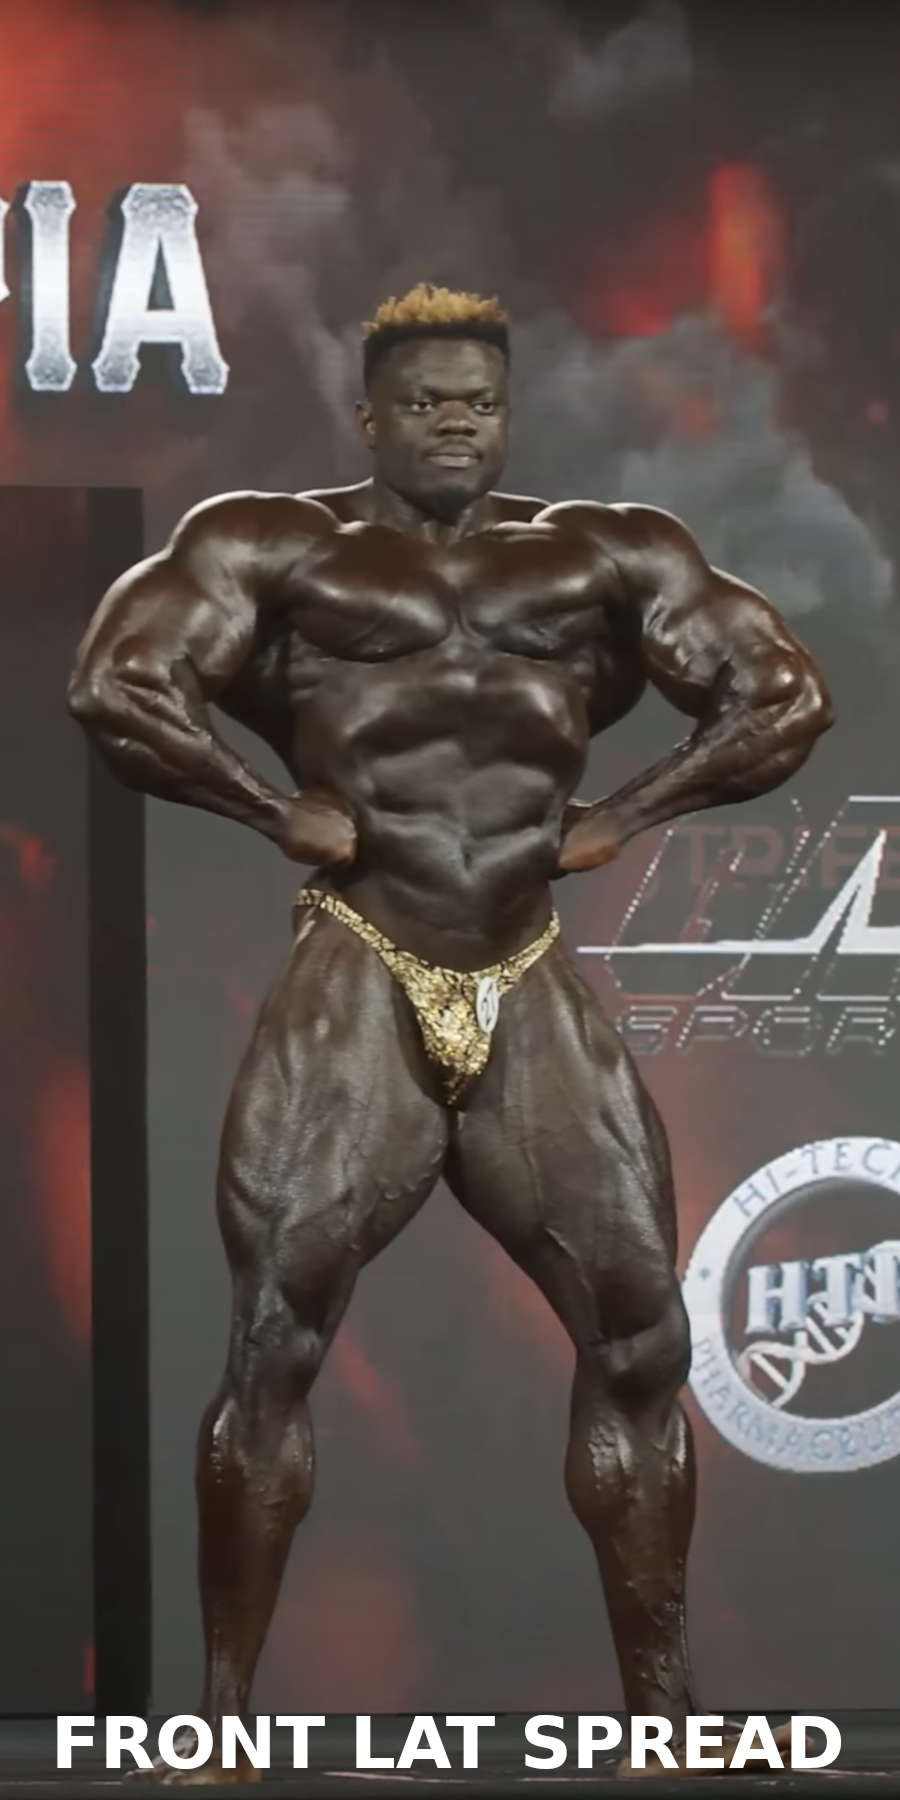 A bodybuilder performing the front lat spread pose on stage during a bodybuilding competition 